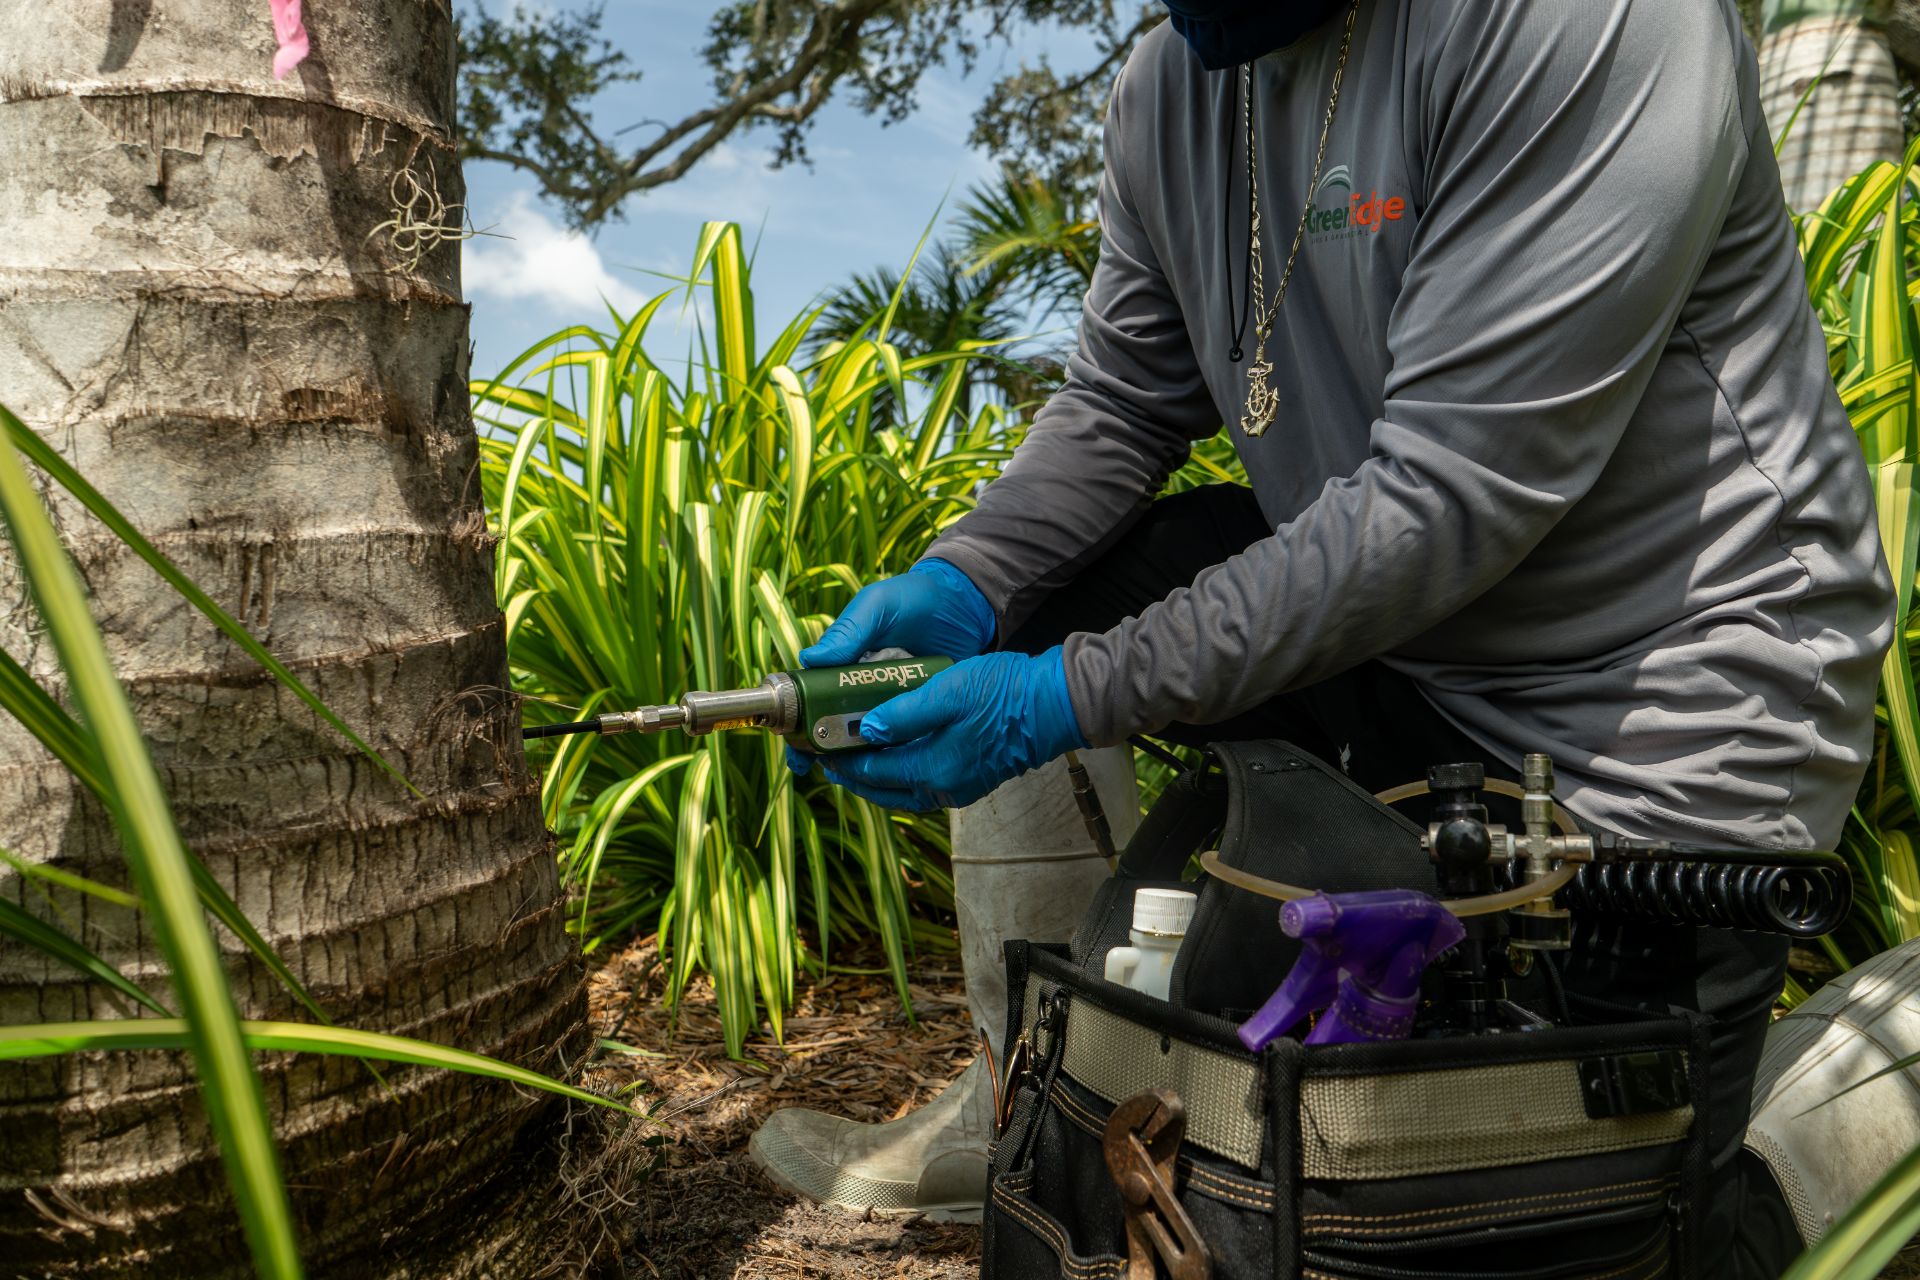 Arborjet injection being performed by a GreenEdge professional in Sarasota. Our skilled team administers targeted treatments to trees using the Arborjet system, promoting their health and protecting against pests or diseases. Trust GreenEdge for expert Arborjet injections and the well-being of your trees.